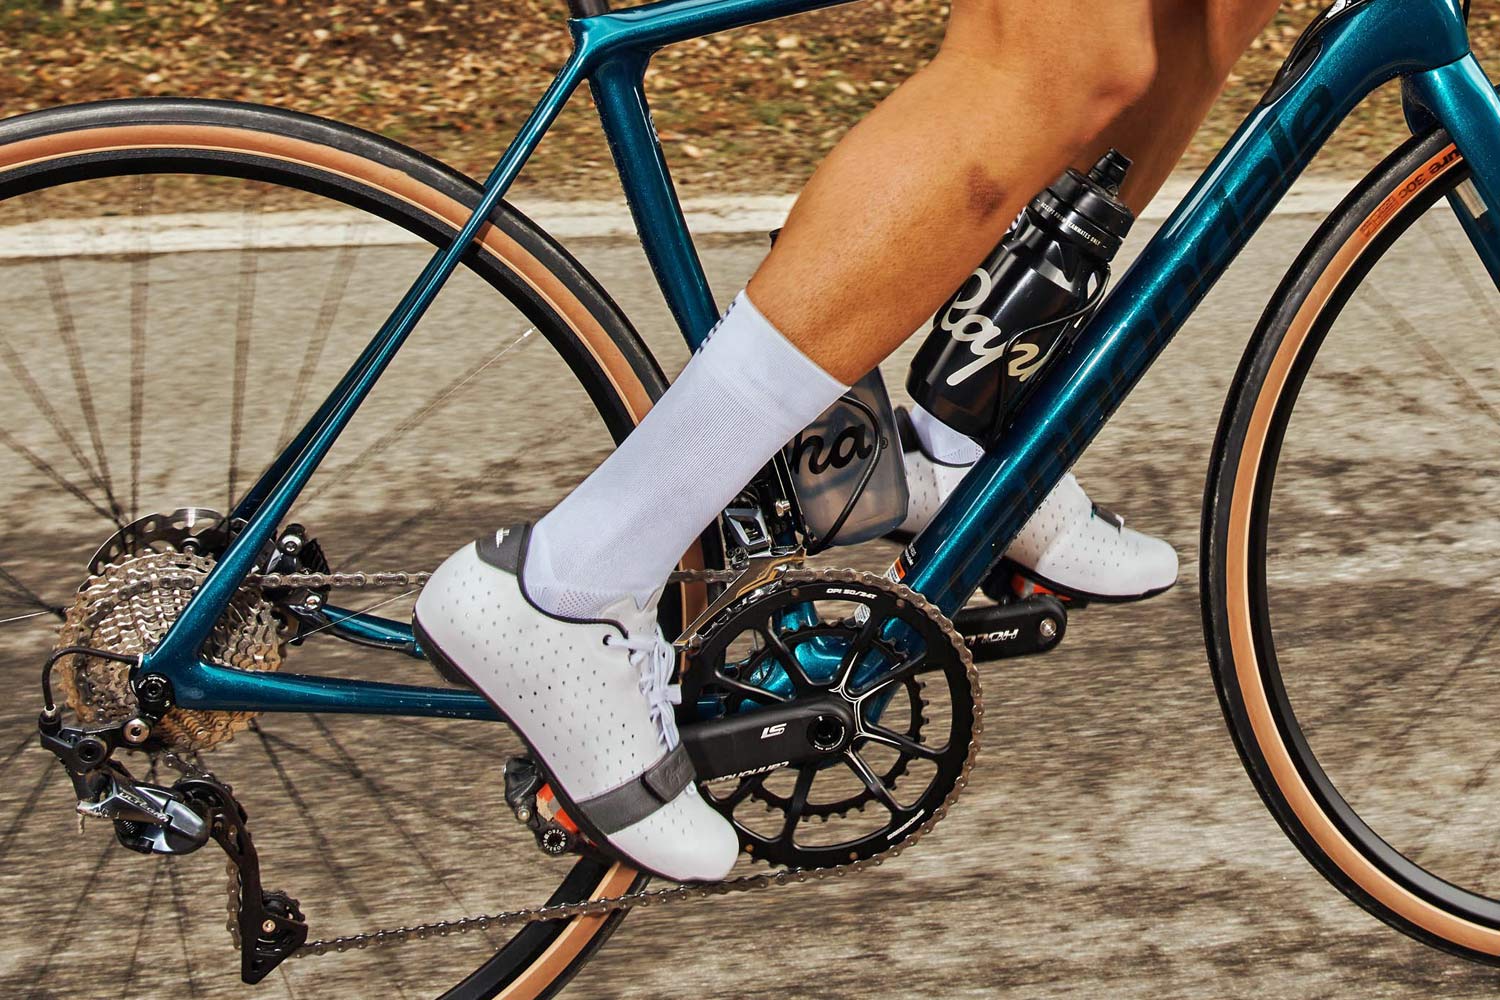 Rapha Explore gravel bike shoes & Classic road bike shoes were developed in-house by Rapha, road & off-road riding